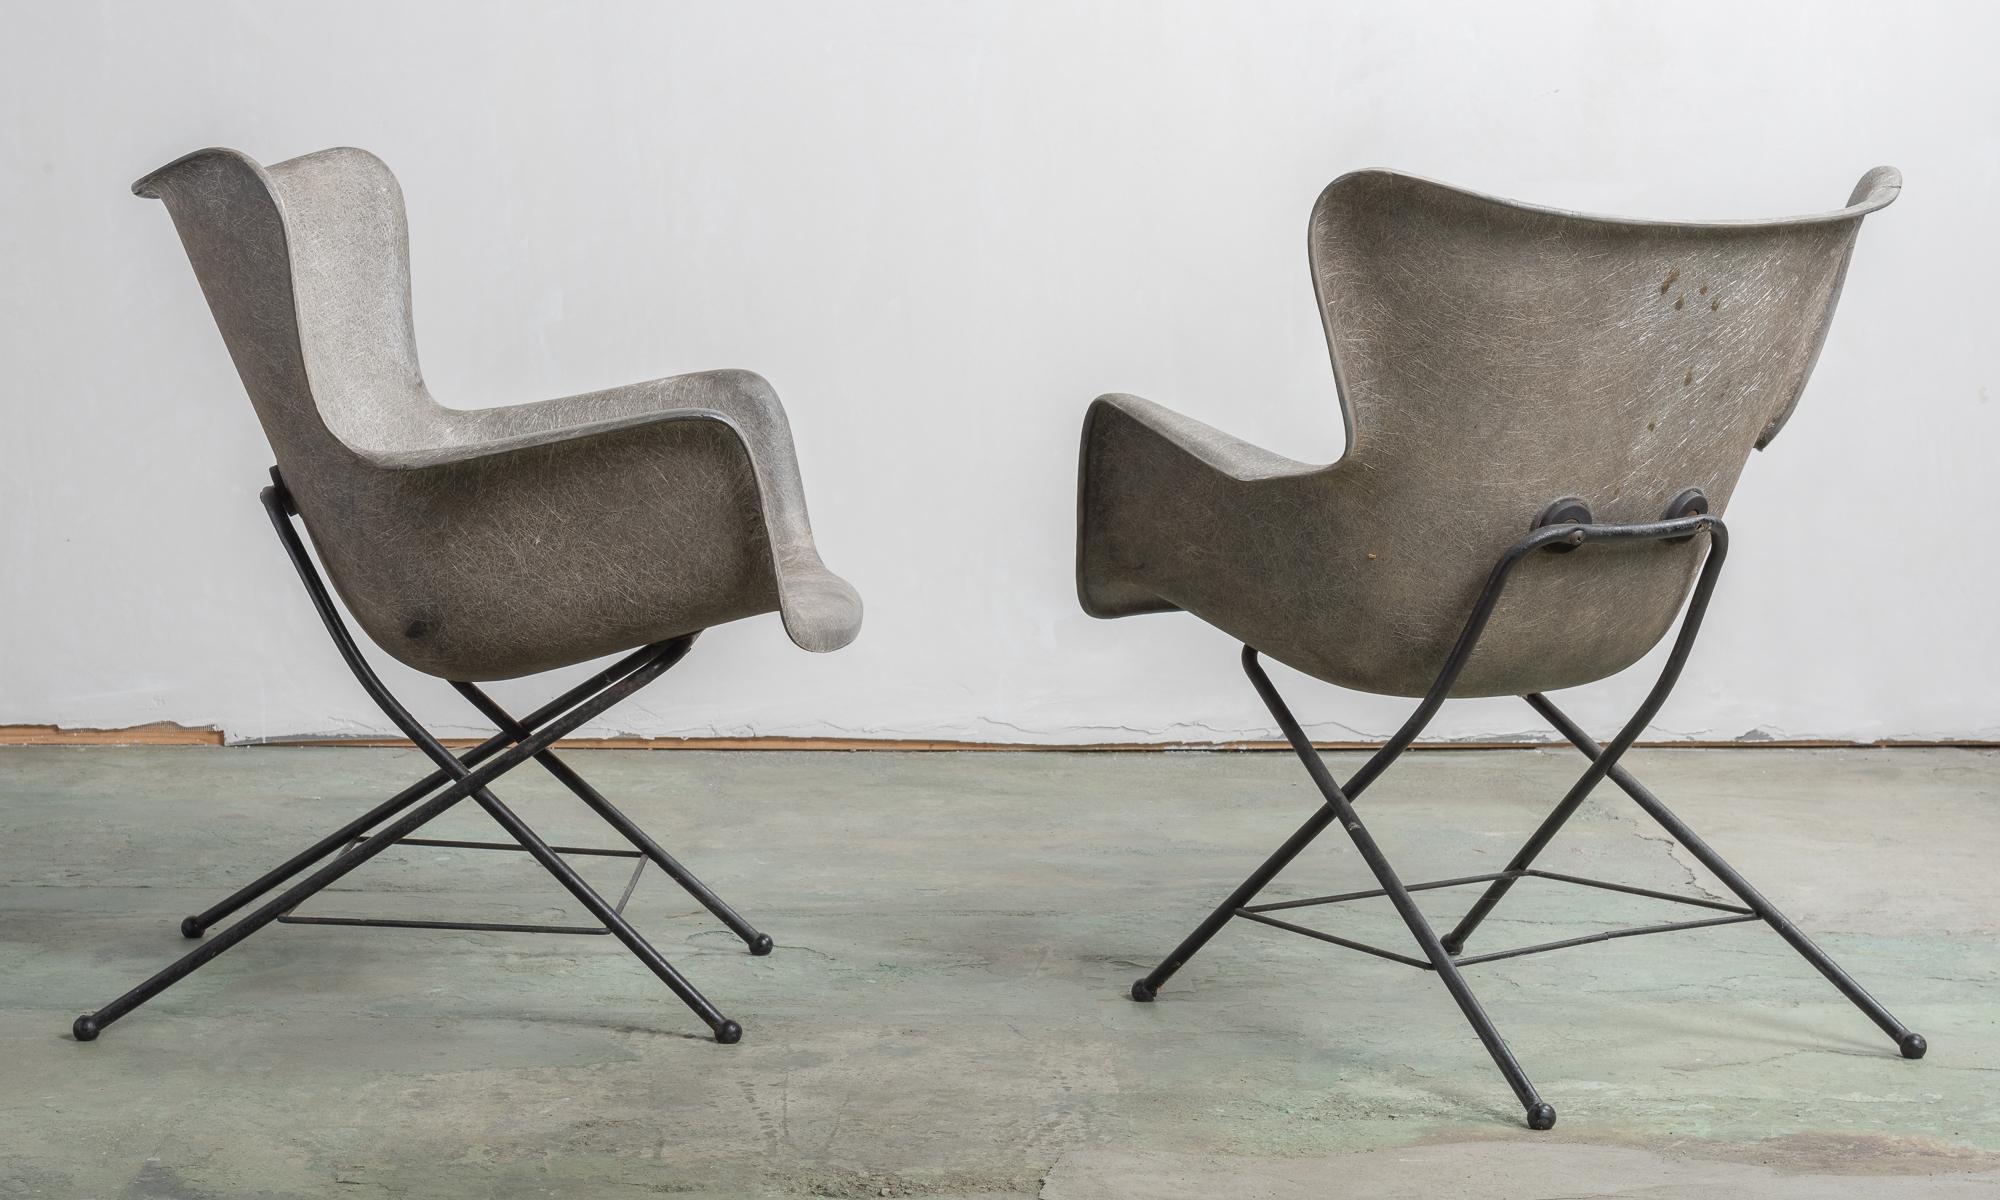 Pair of Modern fiberglass chairs, America, 20th Century.

Molded Fiberglass forms in a light gray with metal supports.